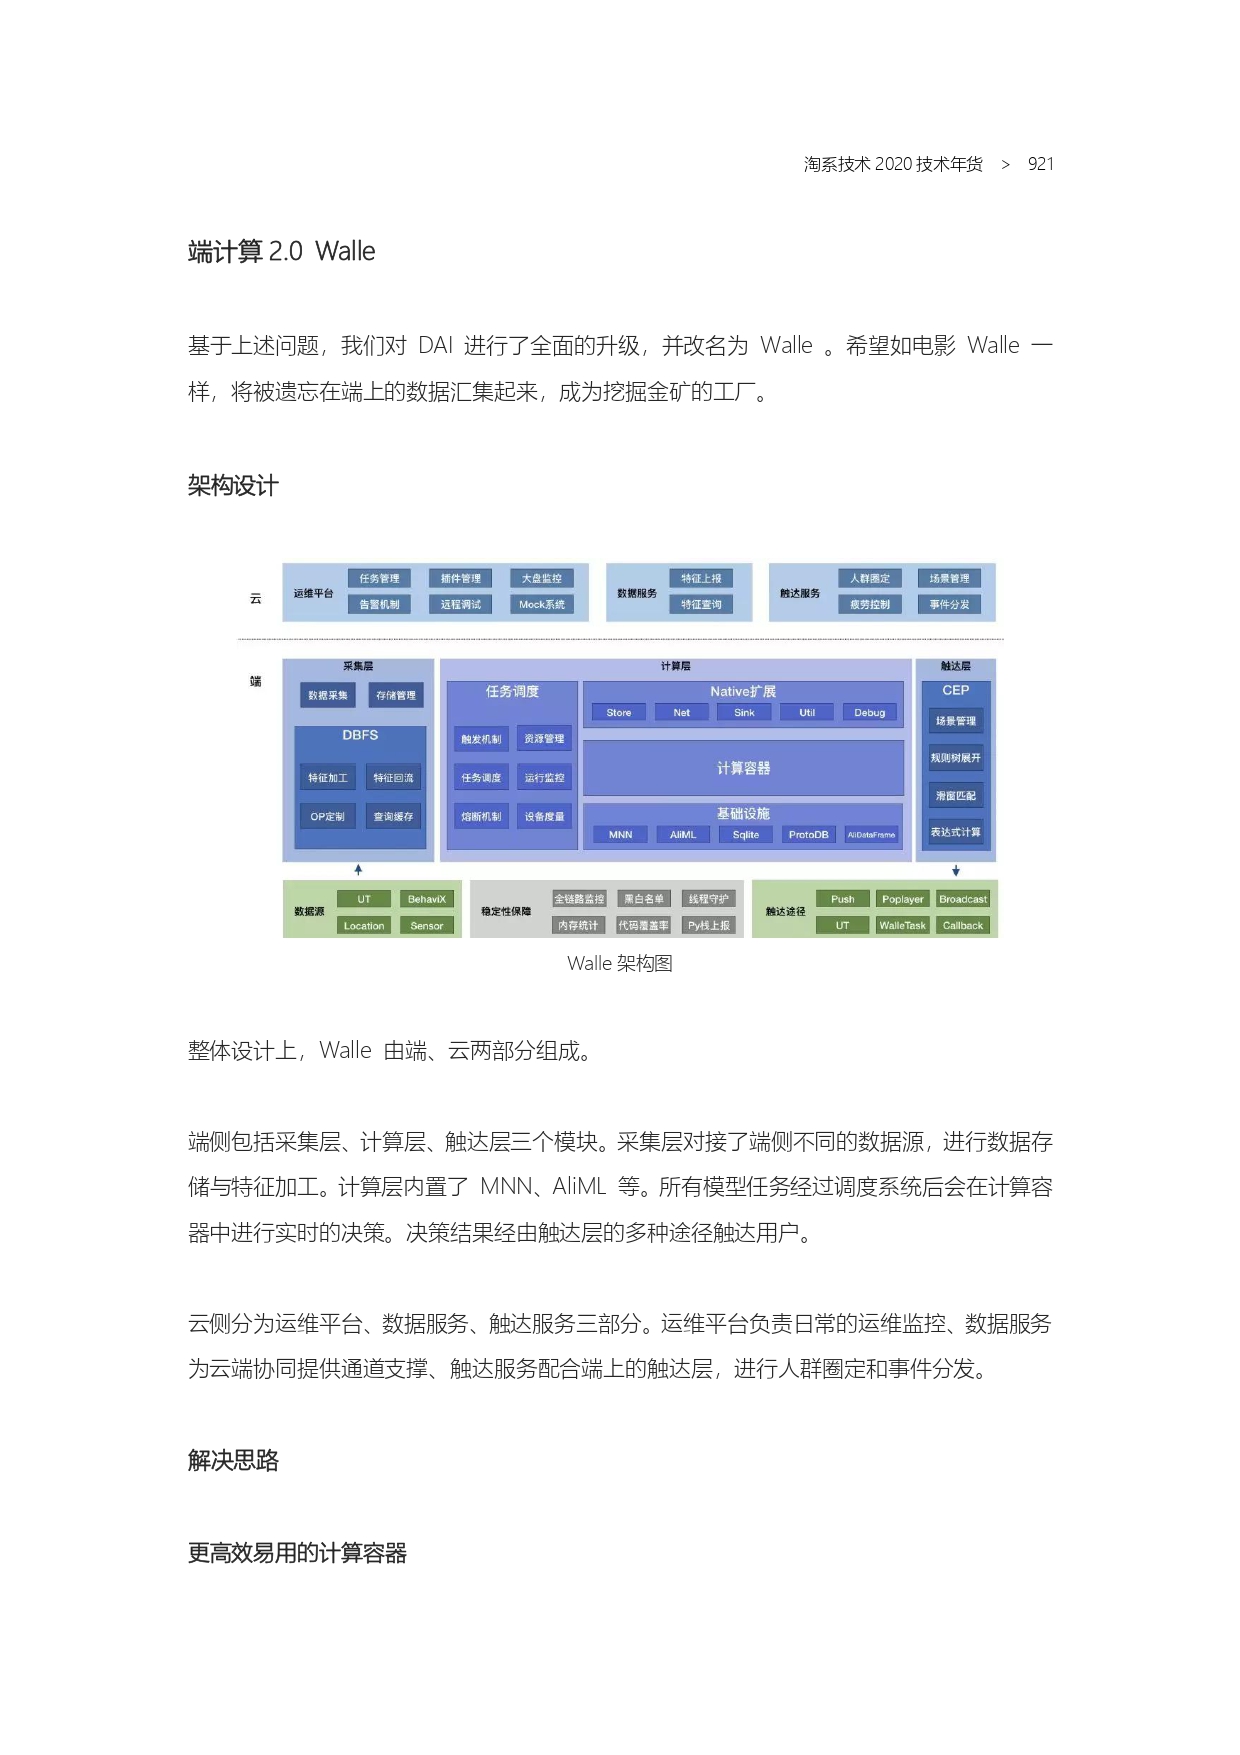 The Complete Works of Tao Technology 2020-571-1189-301-619_page-0051.jpg